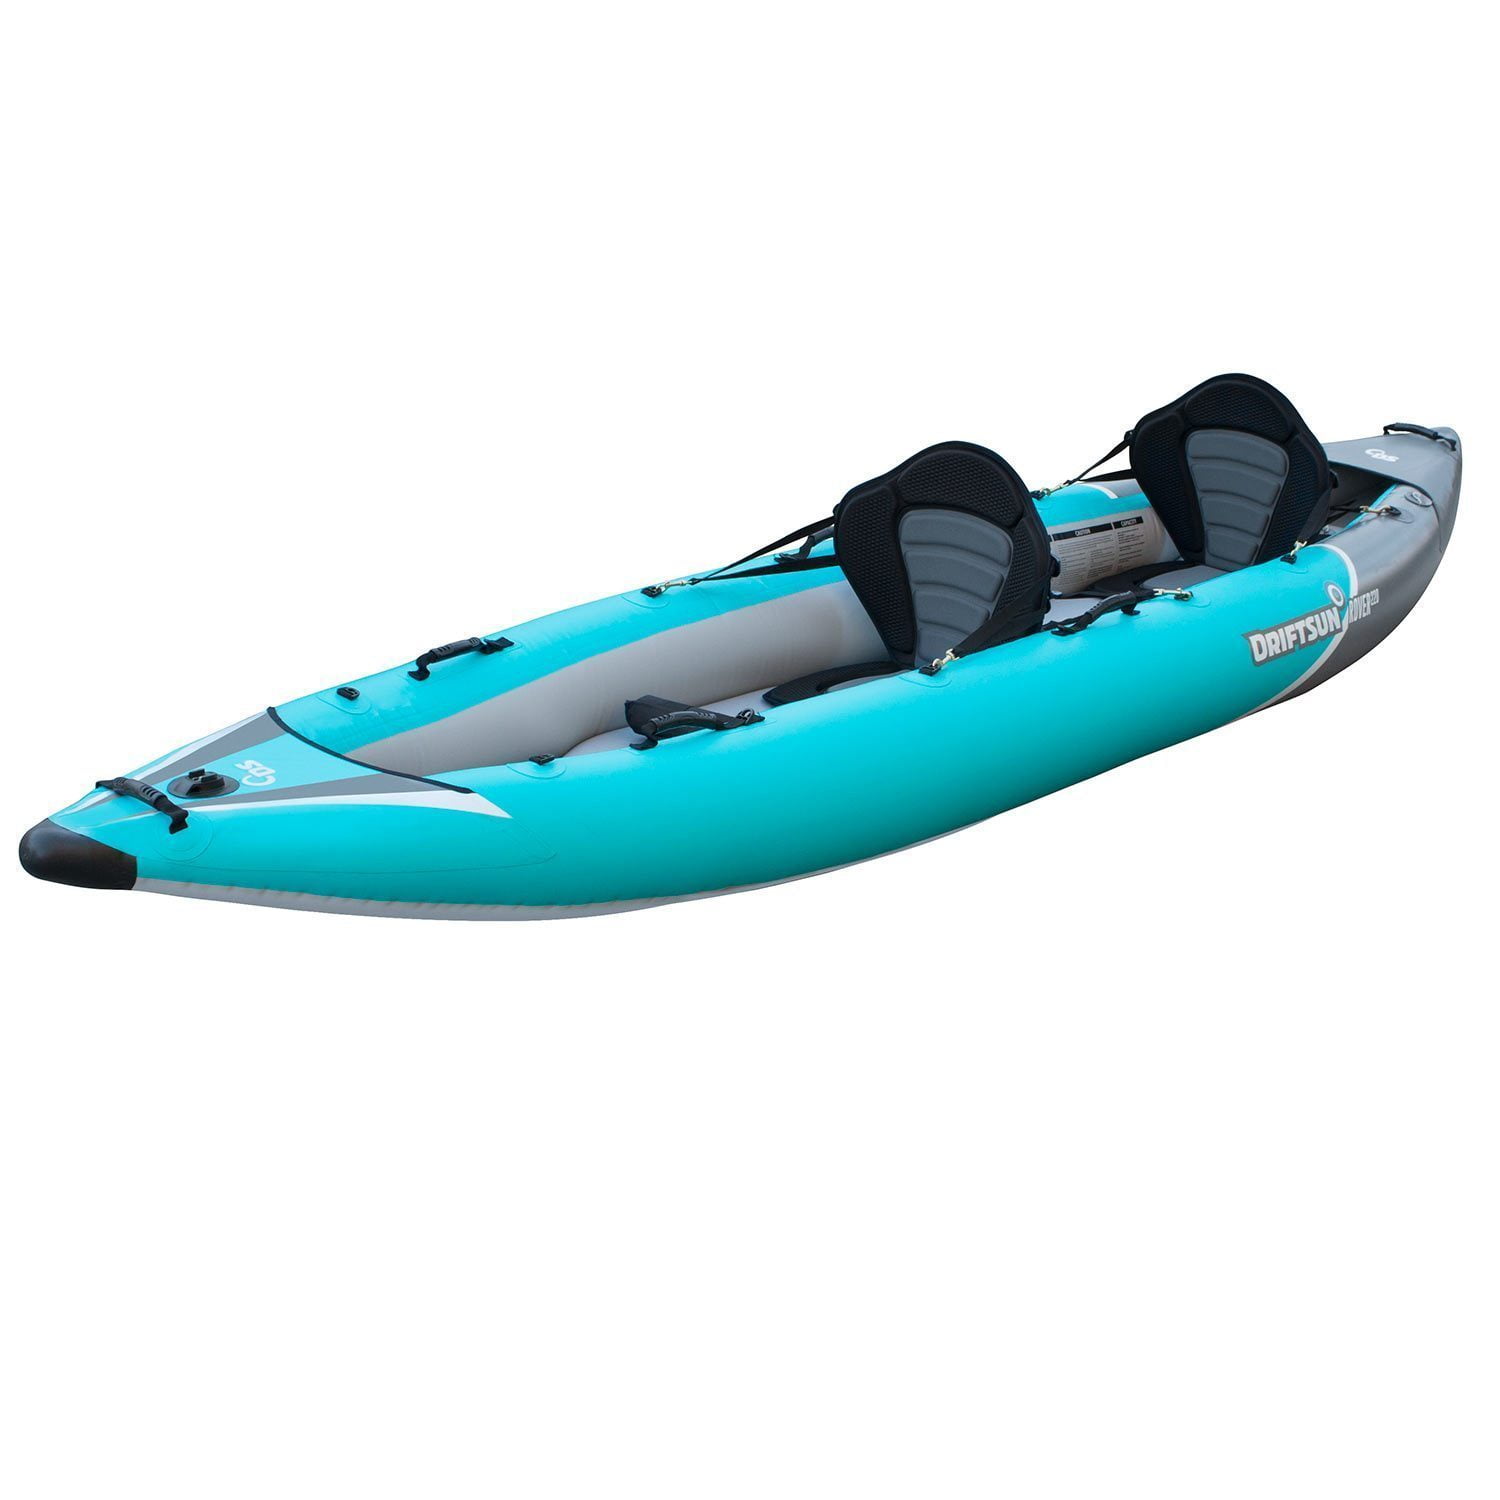 Driftsun Rover 220 Inflatable Tandem Kayak – 2 Person White Water 